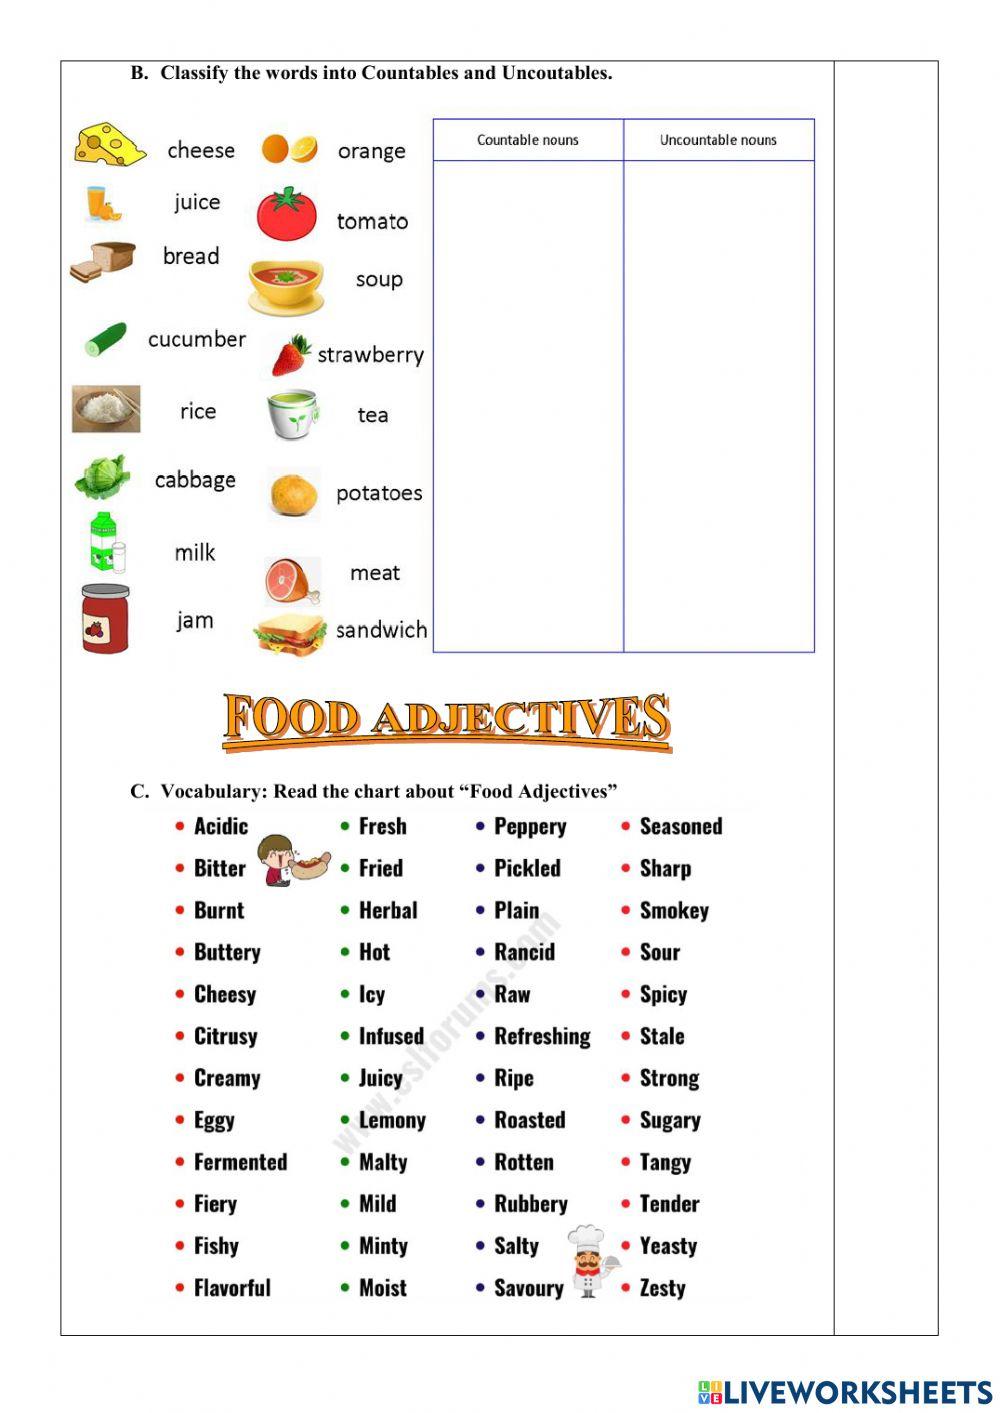 Ejercicios Online-1st BGU A-Countable and Uncountable nouns-Adjectives